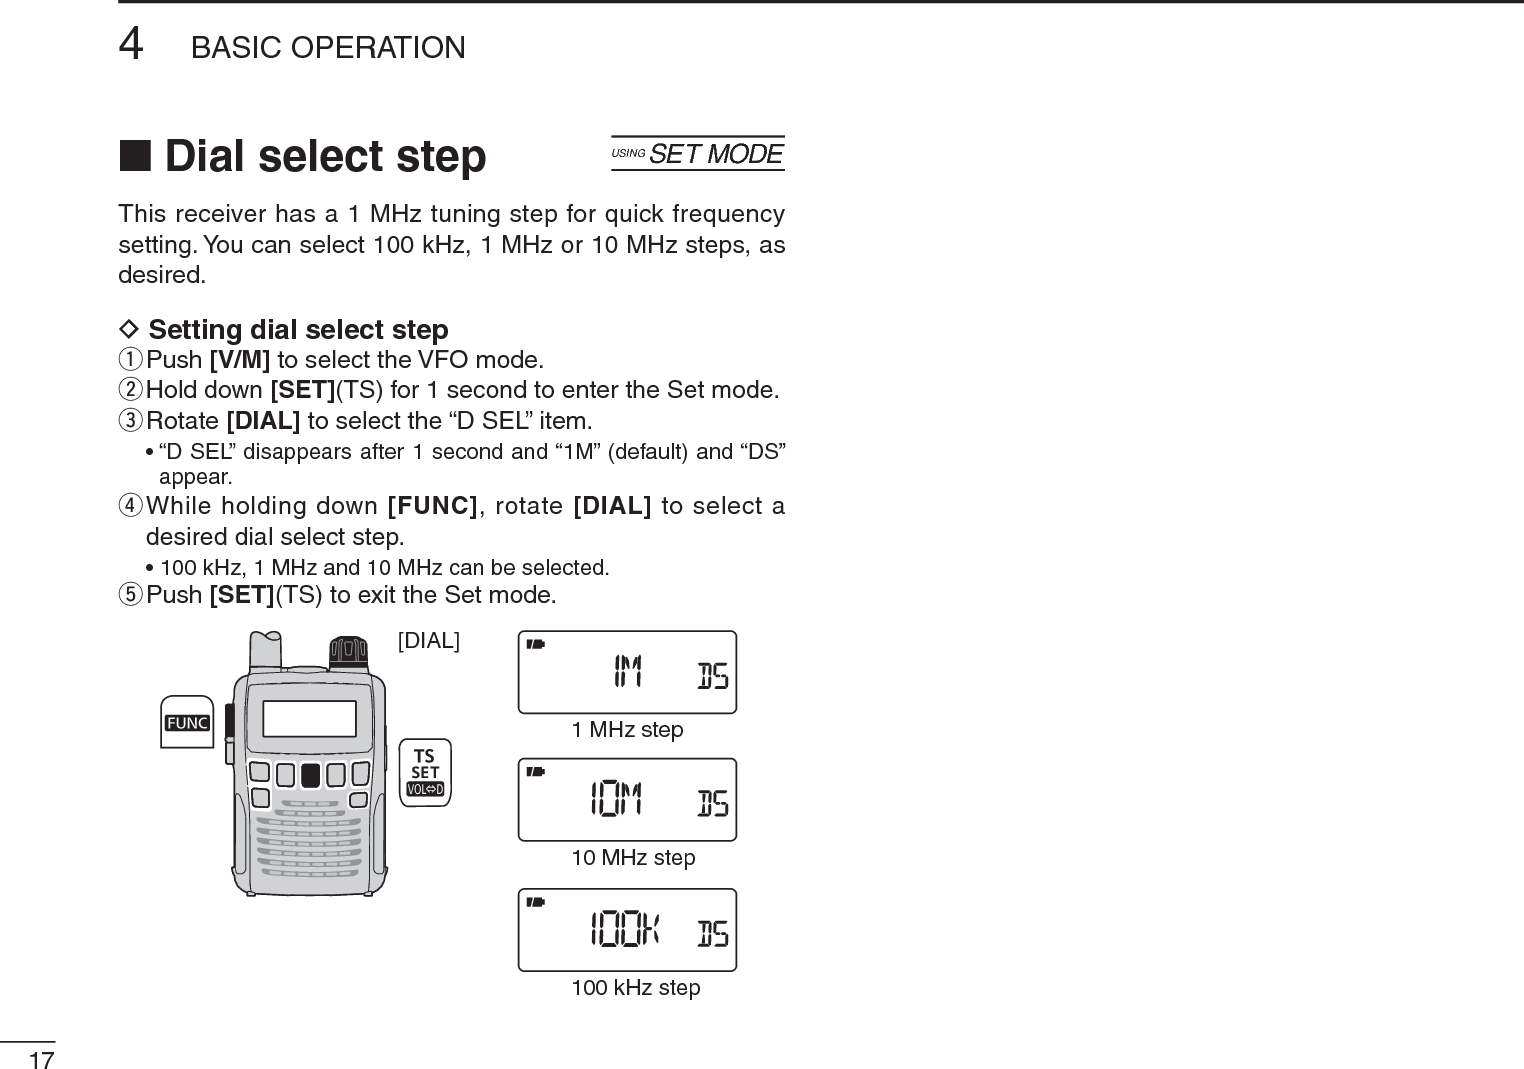 174BASIC OPERATIONN Dial select step [This receiver has a 1 MHz tuning step for quick frequency setting. You can select 100 kHz, 1 MHz or 10 MHz steps, as desired.D Setting dial select stepqPush [V/M] to select the VFO mode.wHold down [SET](TS) for 1 second to enter the Set mode.eRotate [DIAL] to select the “D SEL” item.• “D SEL” disappears after 1 second and “1M” (default) and “DS” appear.r  While holding down [FUNC], rotate [DIAL] to select a desired dial select step.• 100 kHz, 1 MHz and 10 MHz can be selected.tPush [SET](TS) to exit the Set mode.[DIAL]1 MHz step10 MHz step100 kHz step